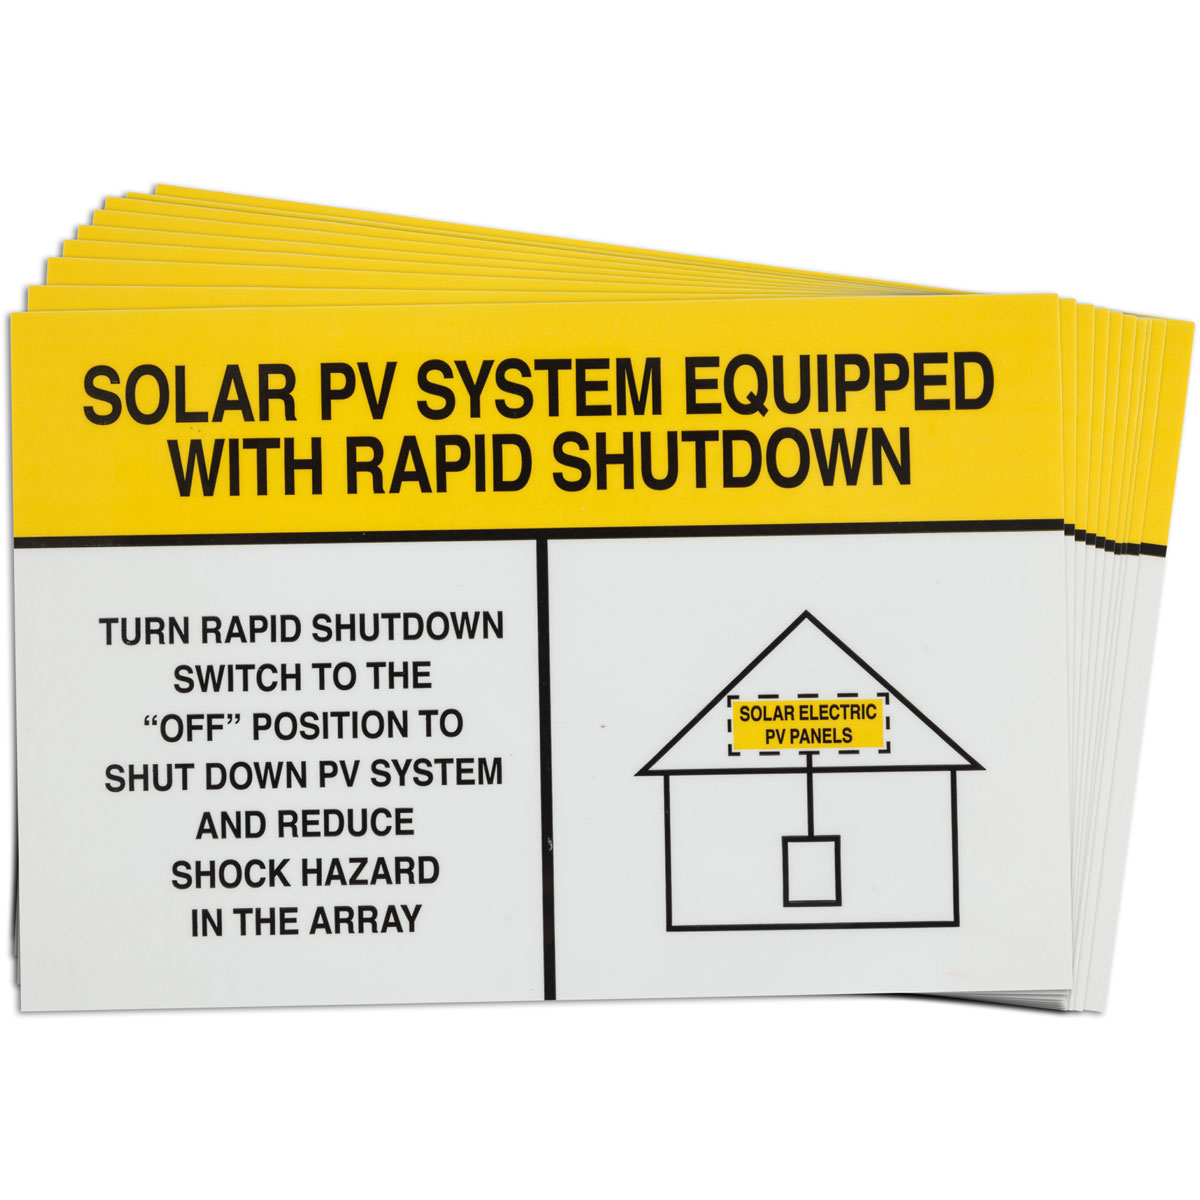 Pre-Printed SOLAR PV SYSTEM EQUIPPED WITH RAPID SHUTDOWN Labels